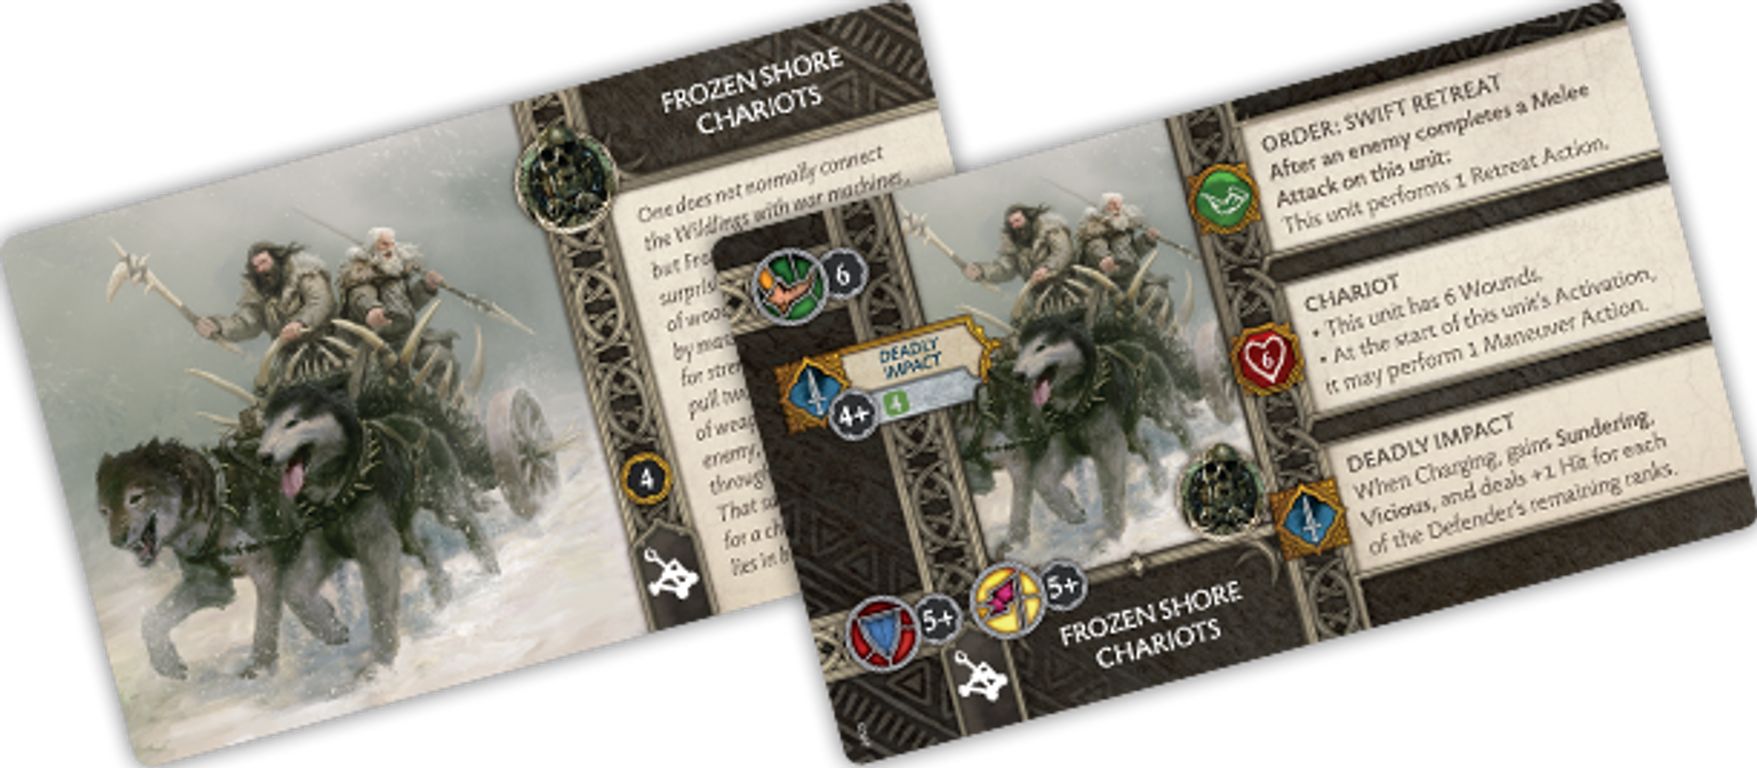 A Song of Ice & Fire: Tabletop Miniatures Game – Frozen Shores Chariots cards